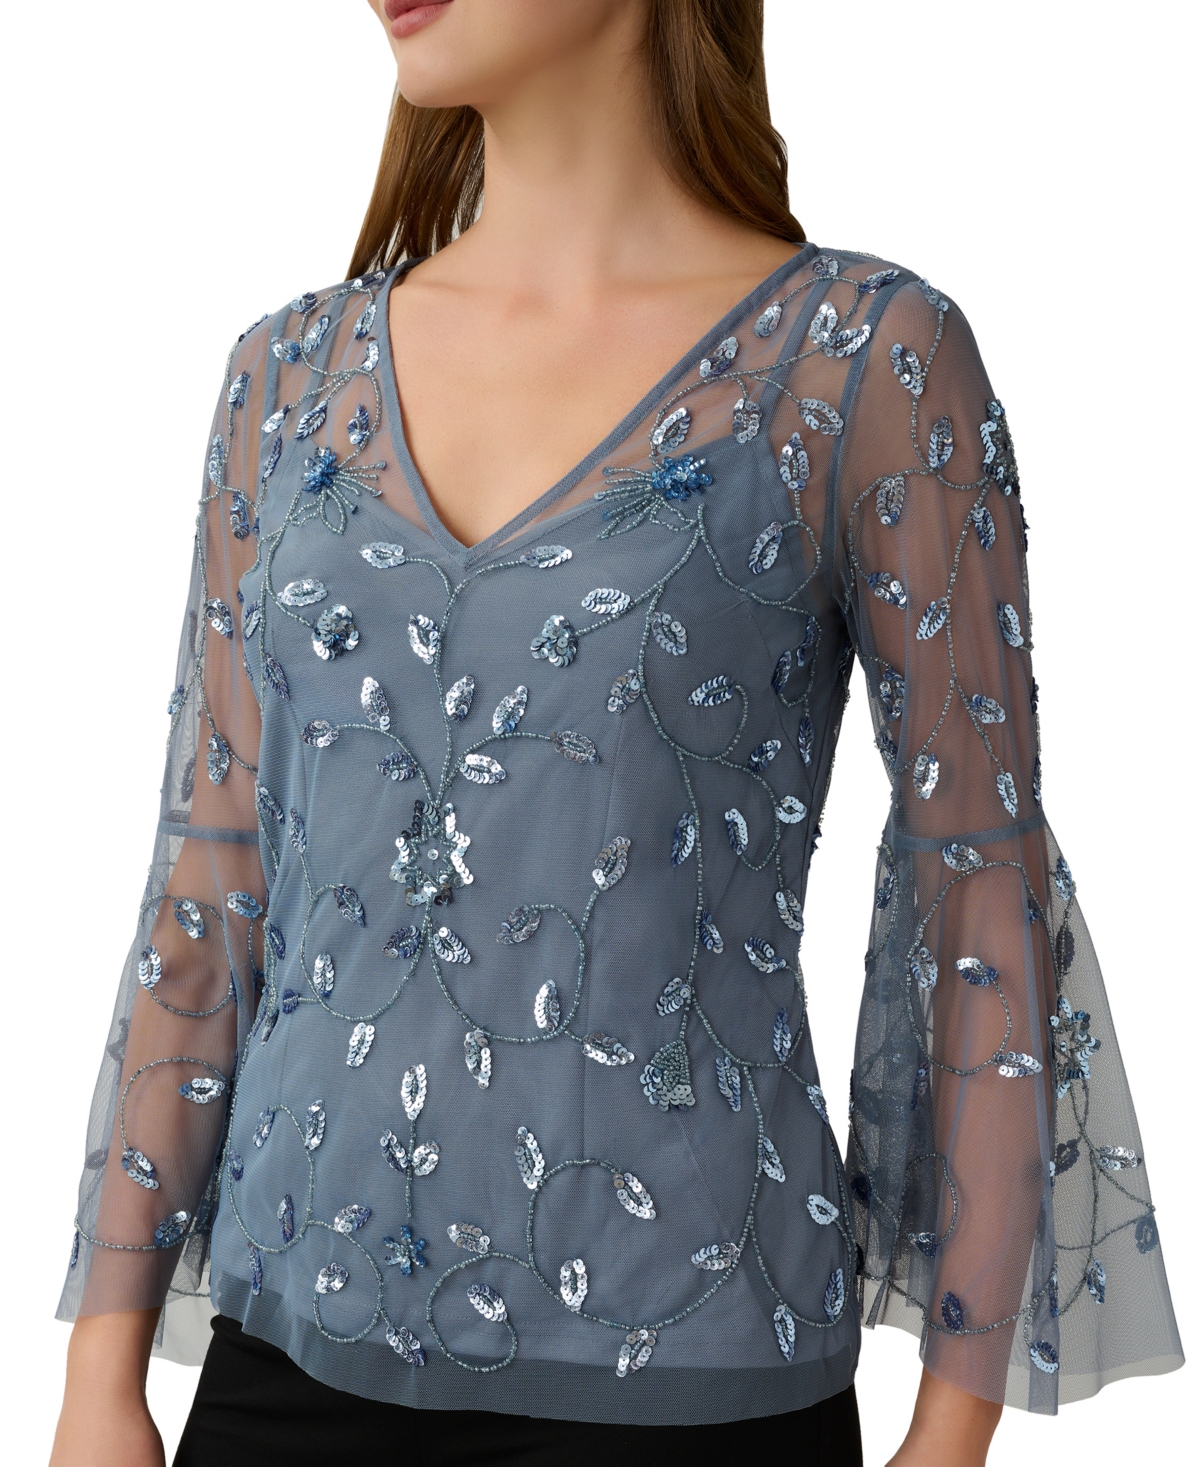  Adrianna Papell Women's V-Neck Embellished Flare-Sleeve Top